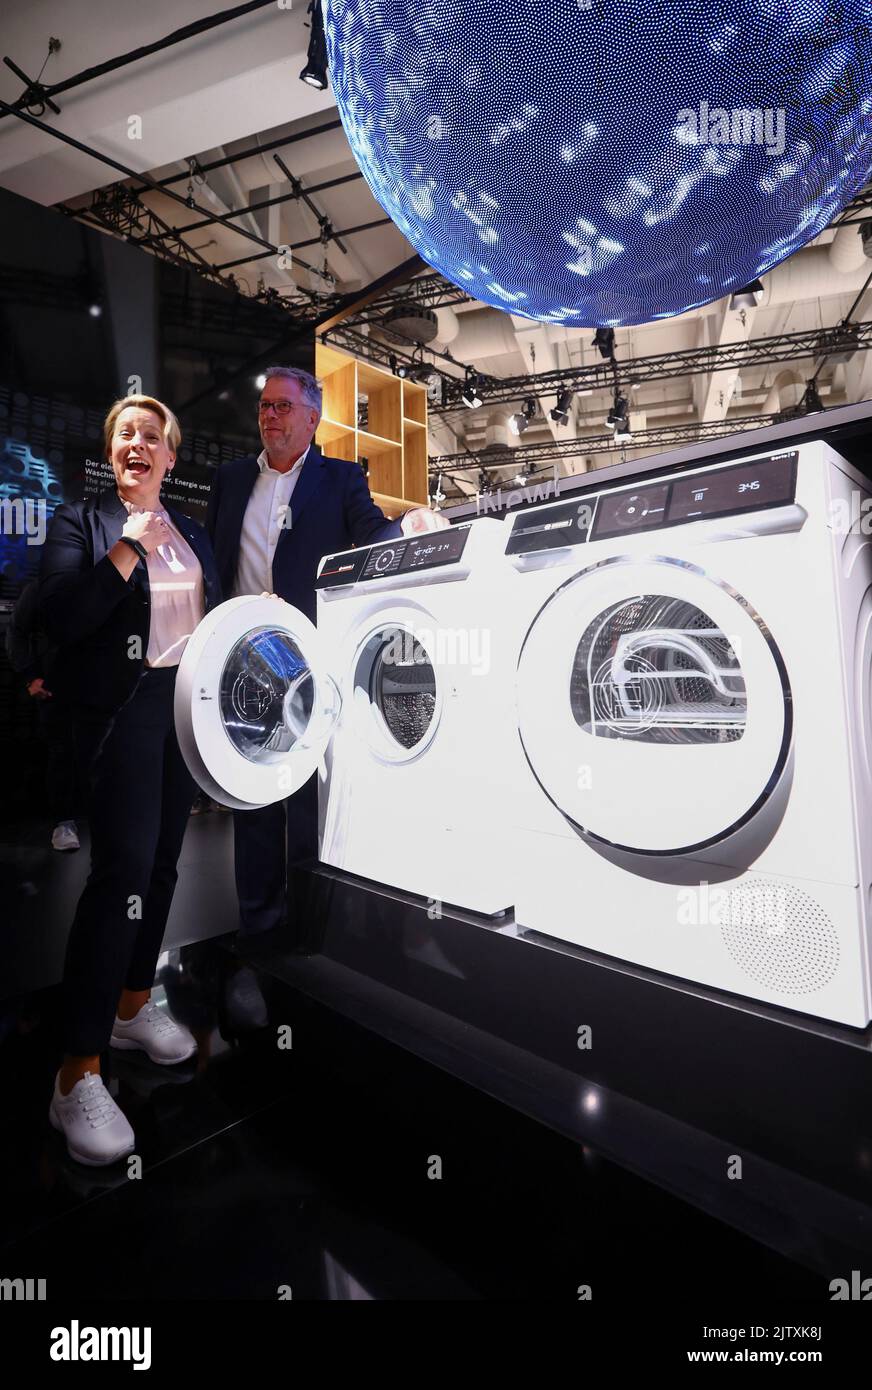 Berlin's Mayor Franziska Giffey reacts next to a washing machine from Bosch as she tours the international consumer technology fair IFA in Berlin, Germany September 2, 2022. REUTERS/Lisi Niesner Stock Photo